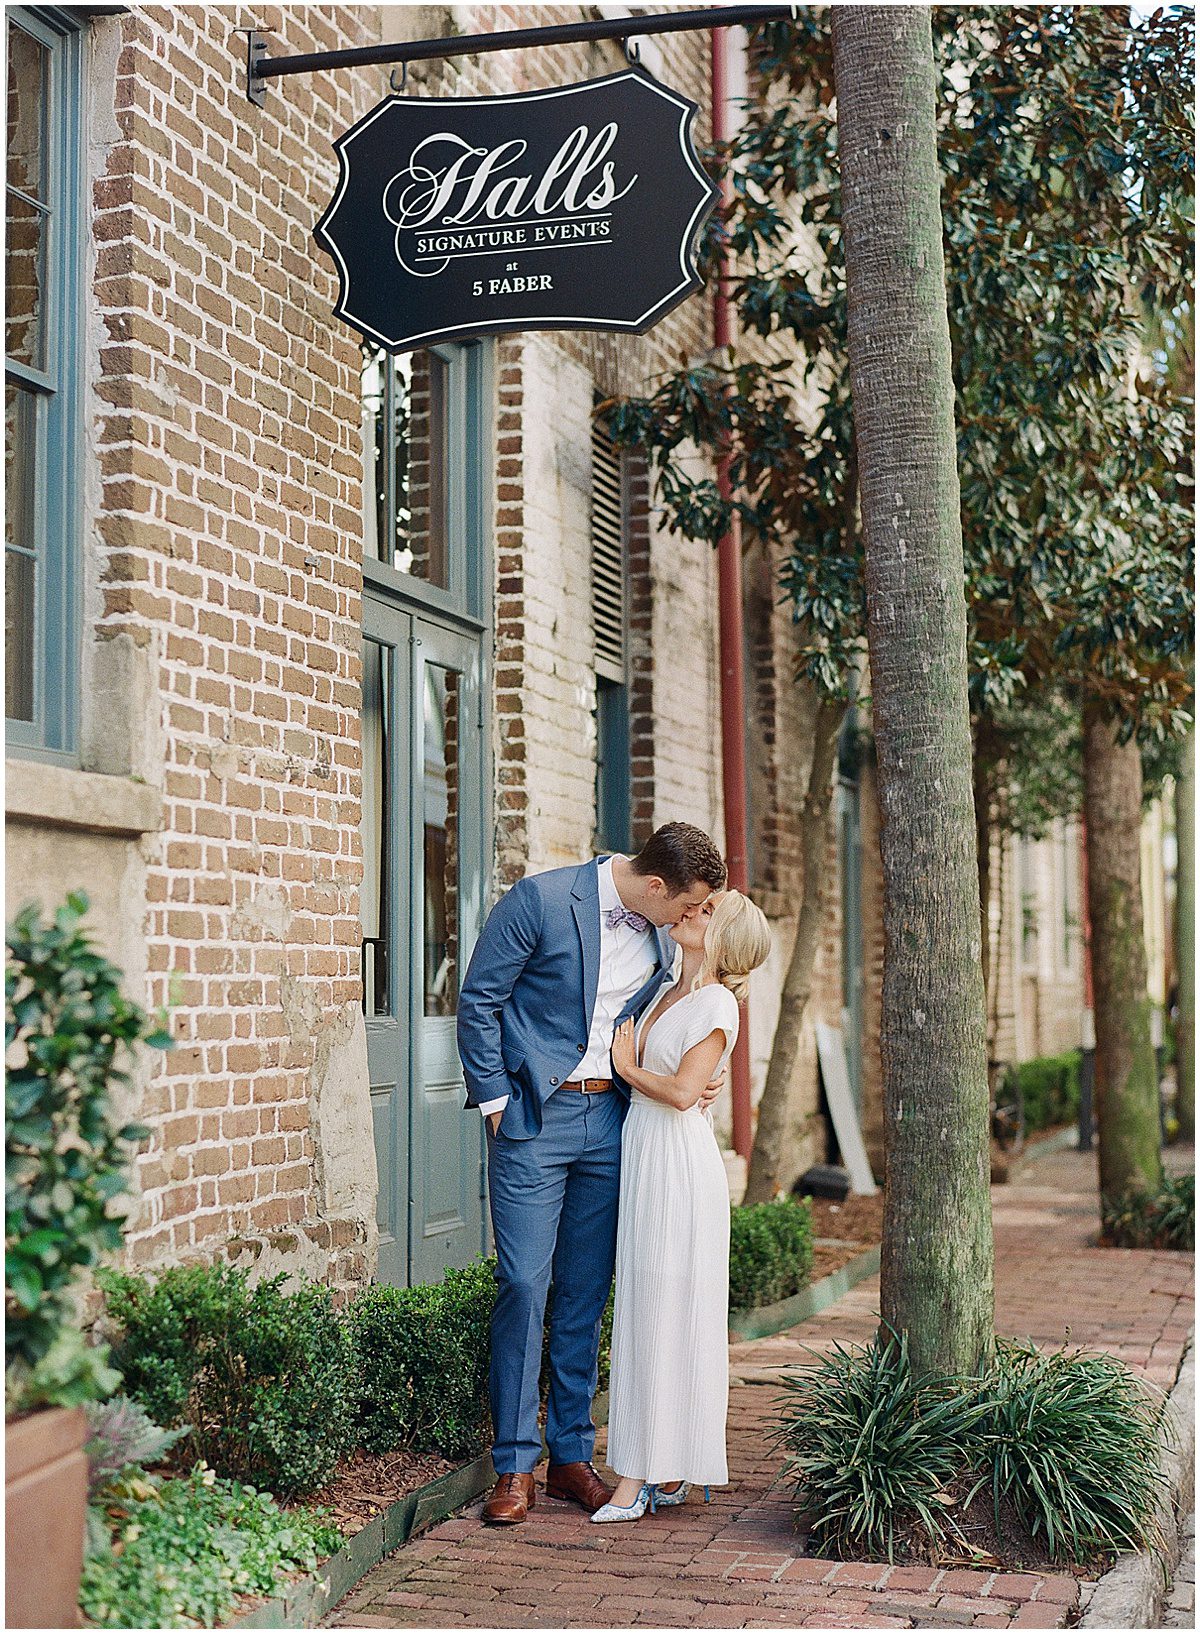 Bride and Groom at Halls Signature Events in Downtown Charleston Photo